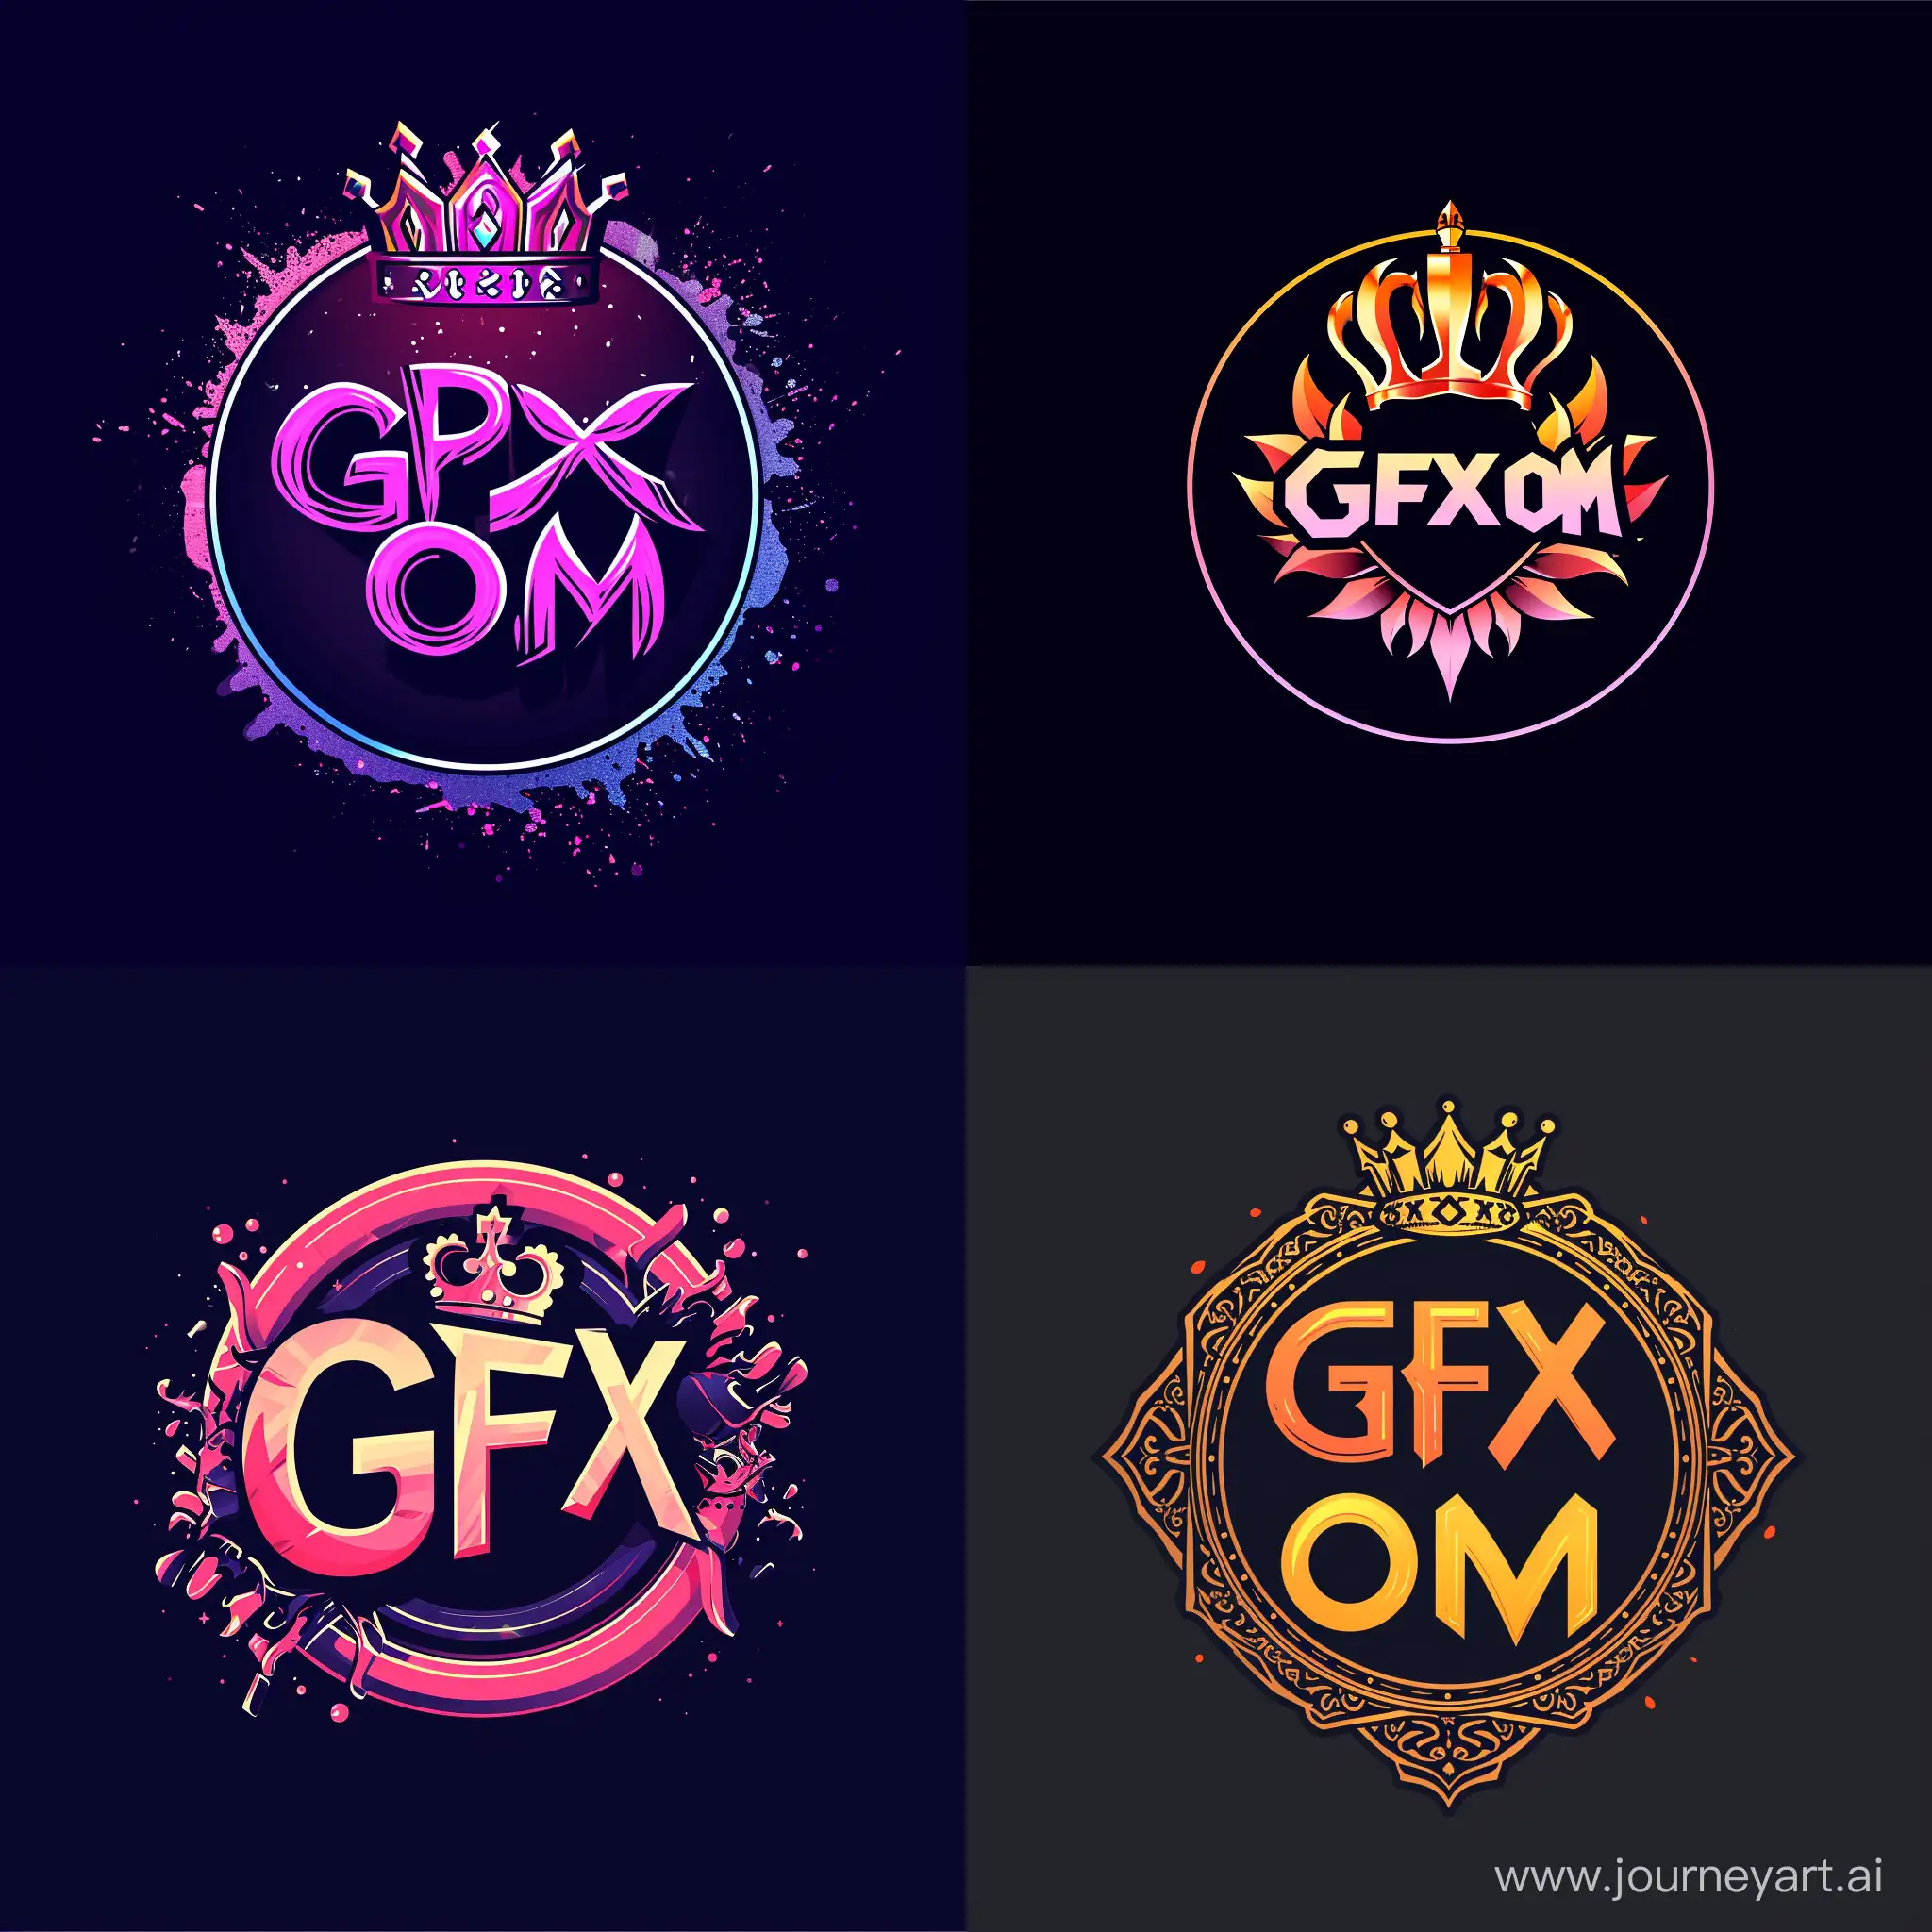 "Design a logo for a Artist company called 'GFX OM'. The company specializes in providing creative art tutorials like photoshop tutorials or illustrator tutorials. Made logo by help of photoshop or illustrator . Include crown in logo. Avoid 3d perspective for logo. logo should convey a sense of professionalism. Use a color palette. Feel free to explore different typography styles and layouts to create a visually appealing and memorable logo. Logo in circular form.
